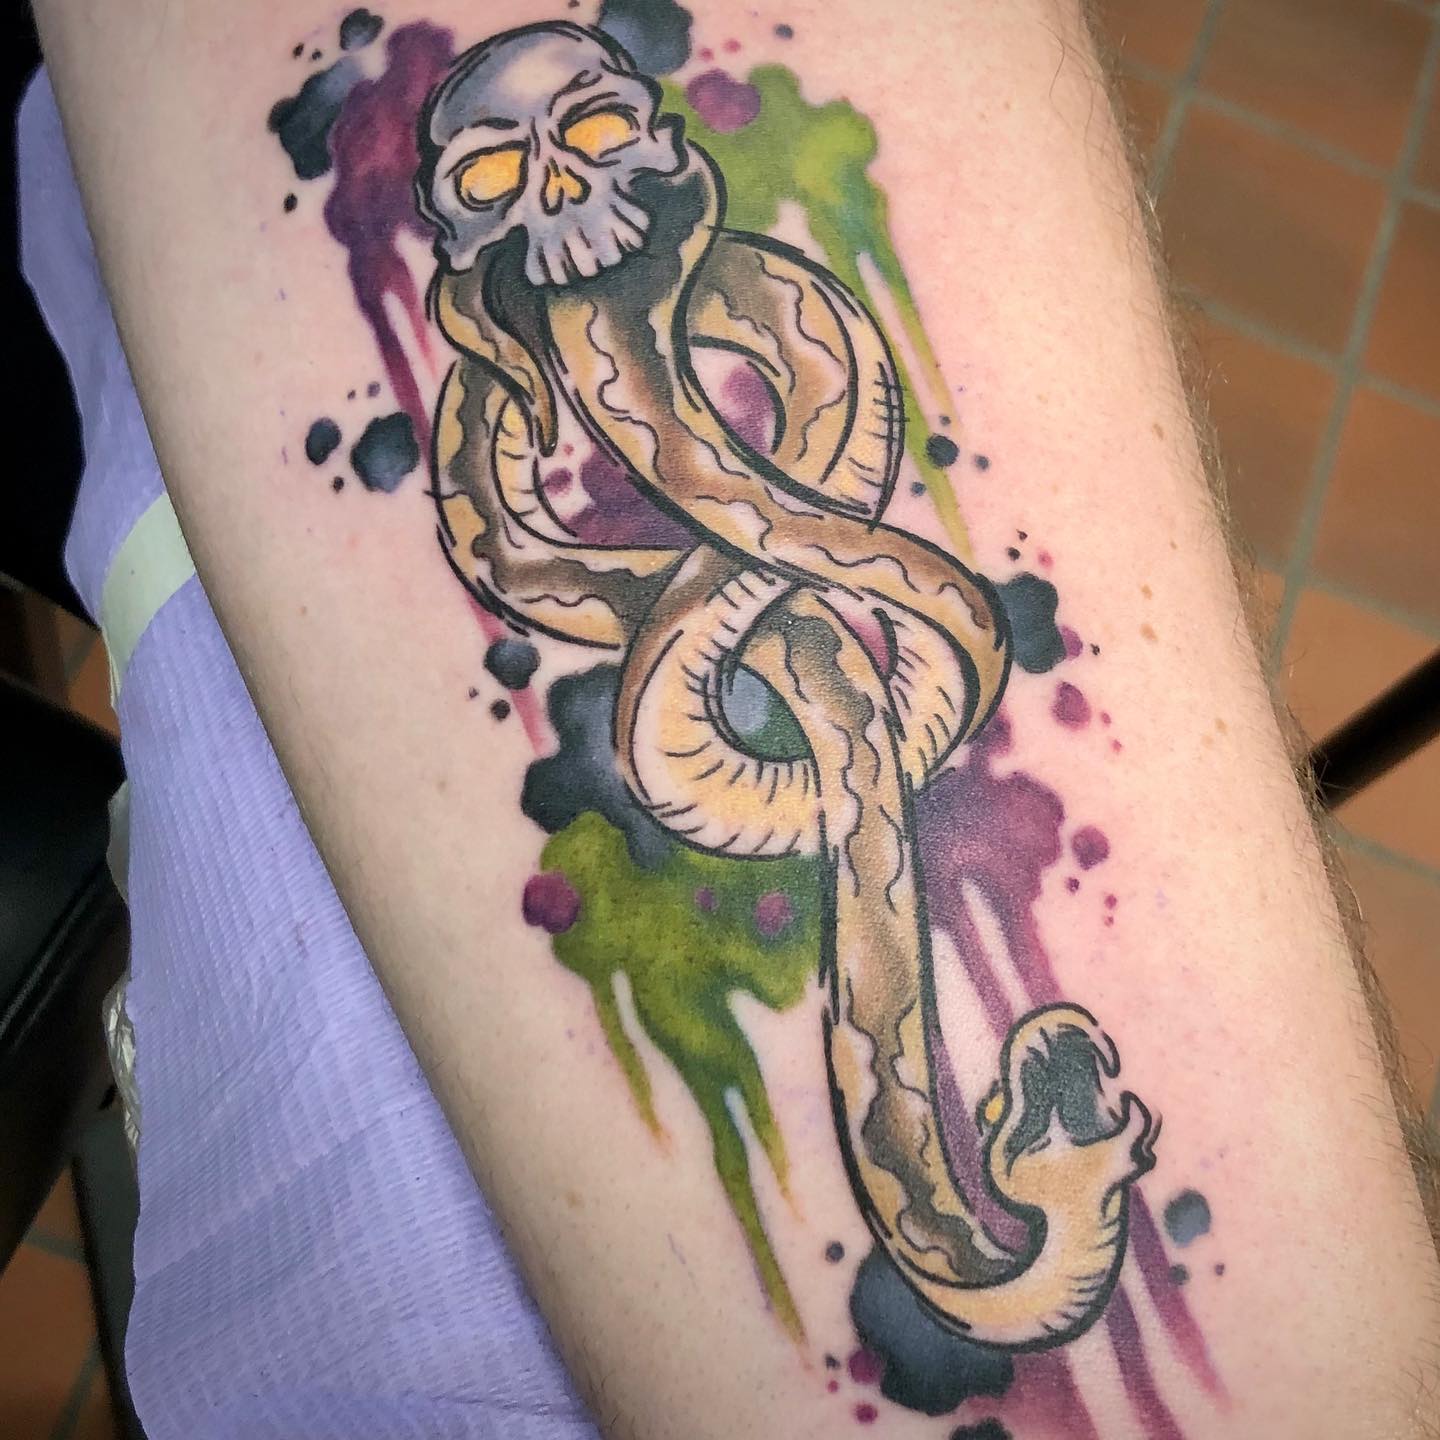 It is so hard to resist this great splash tattoo. It's so beautiful and clearly done by someone who is very talented. Soft colors of pink, green and blue shows a great harmony with the death eater sign.